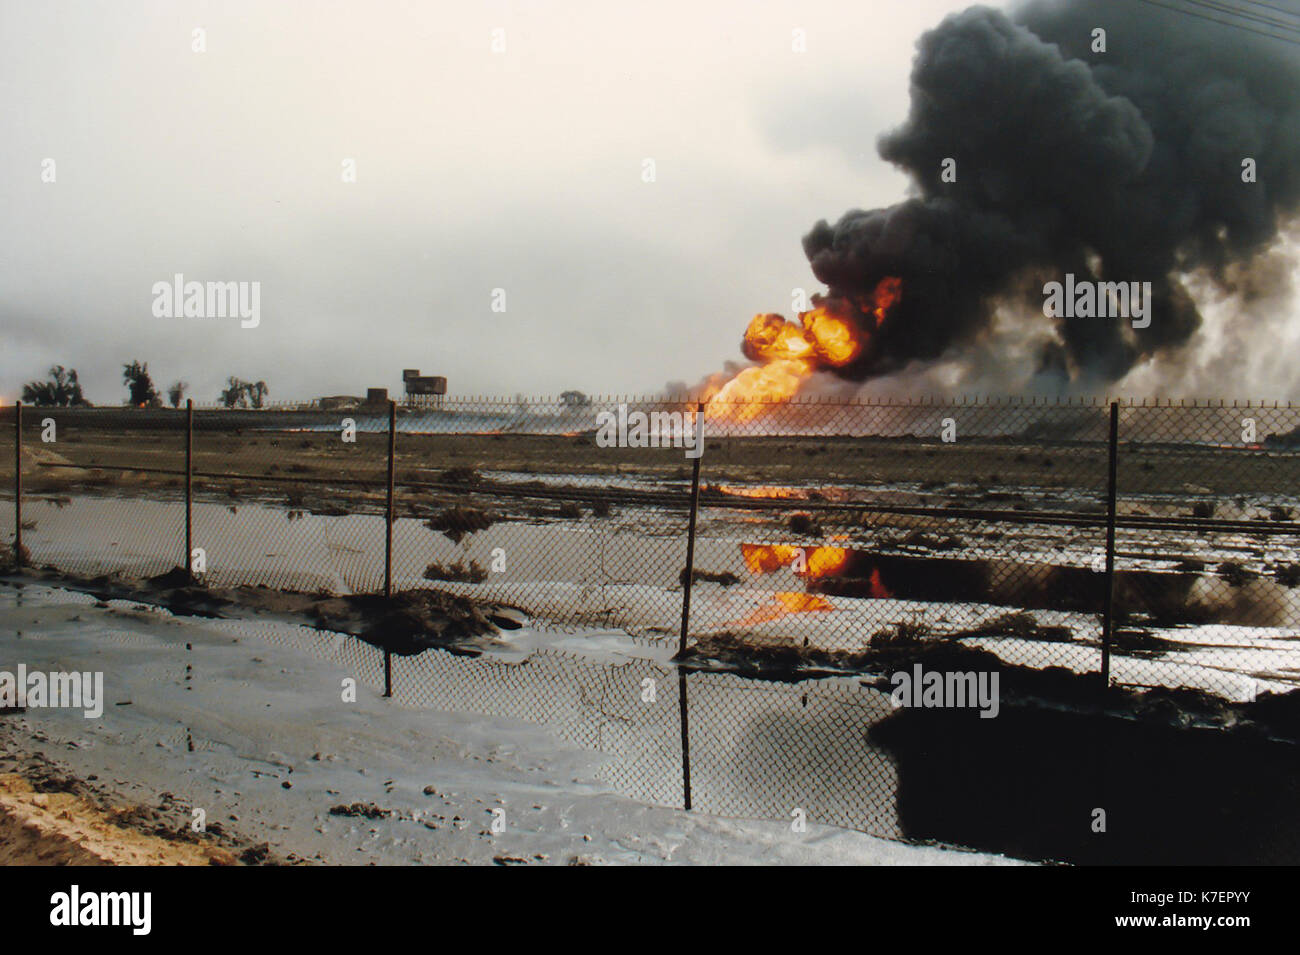 Burning oil well in field coated in spilled oil in aftermath of Operation Desert Storm, Persian Gulf War following the Iraq invasion of Kuwait. Stock Photo